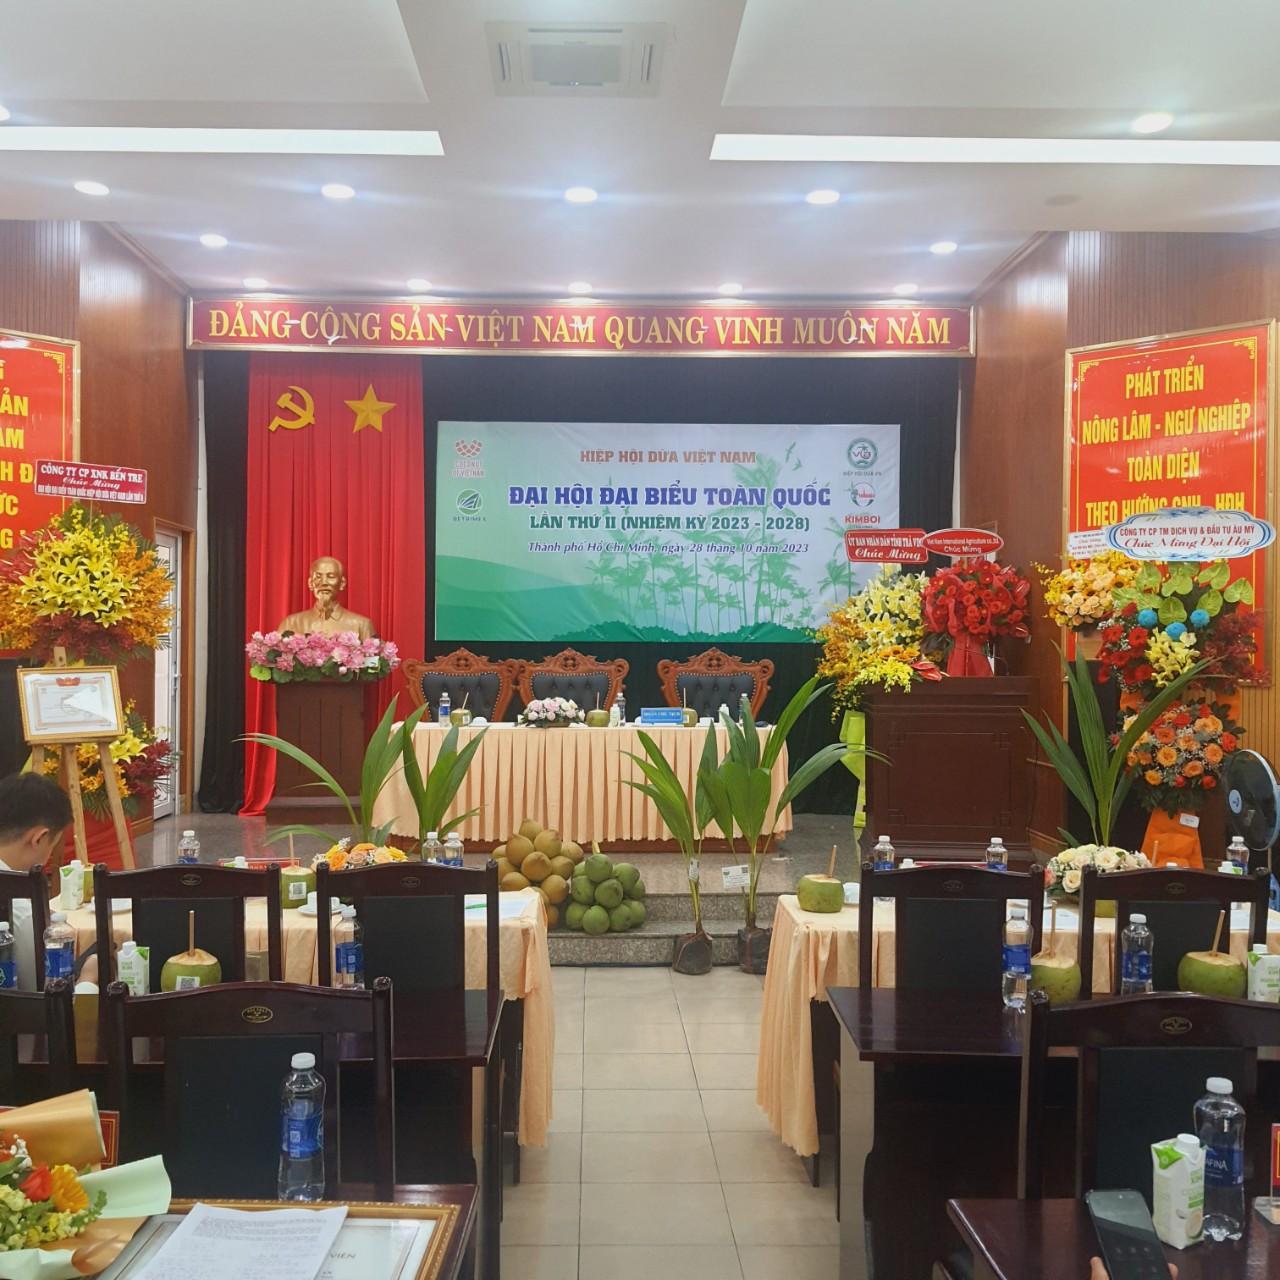 Coconut products company participated in the 2nd national congress of the Vietnam Coconut Association